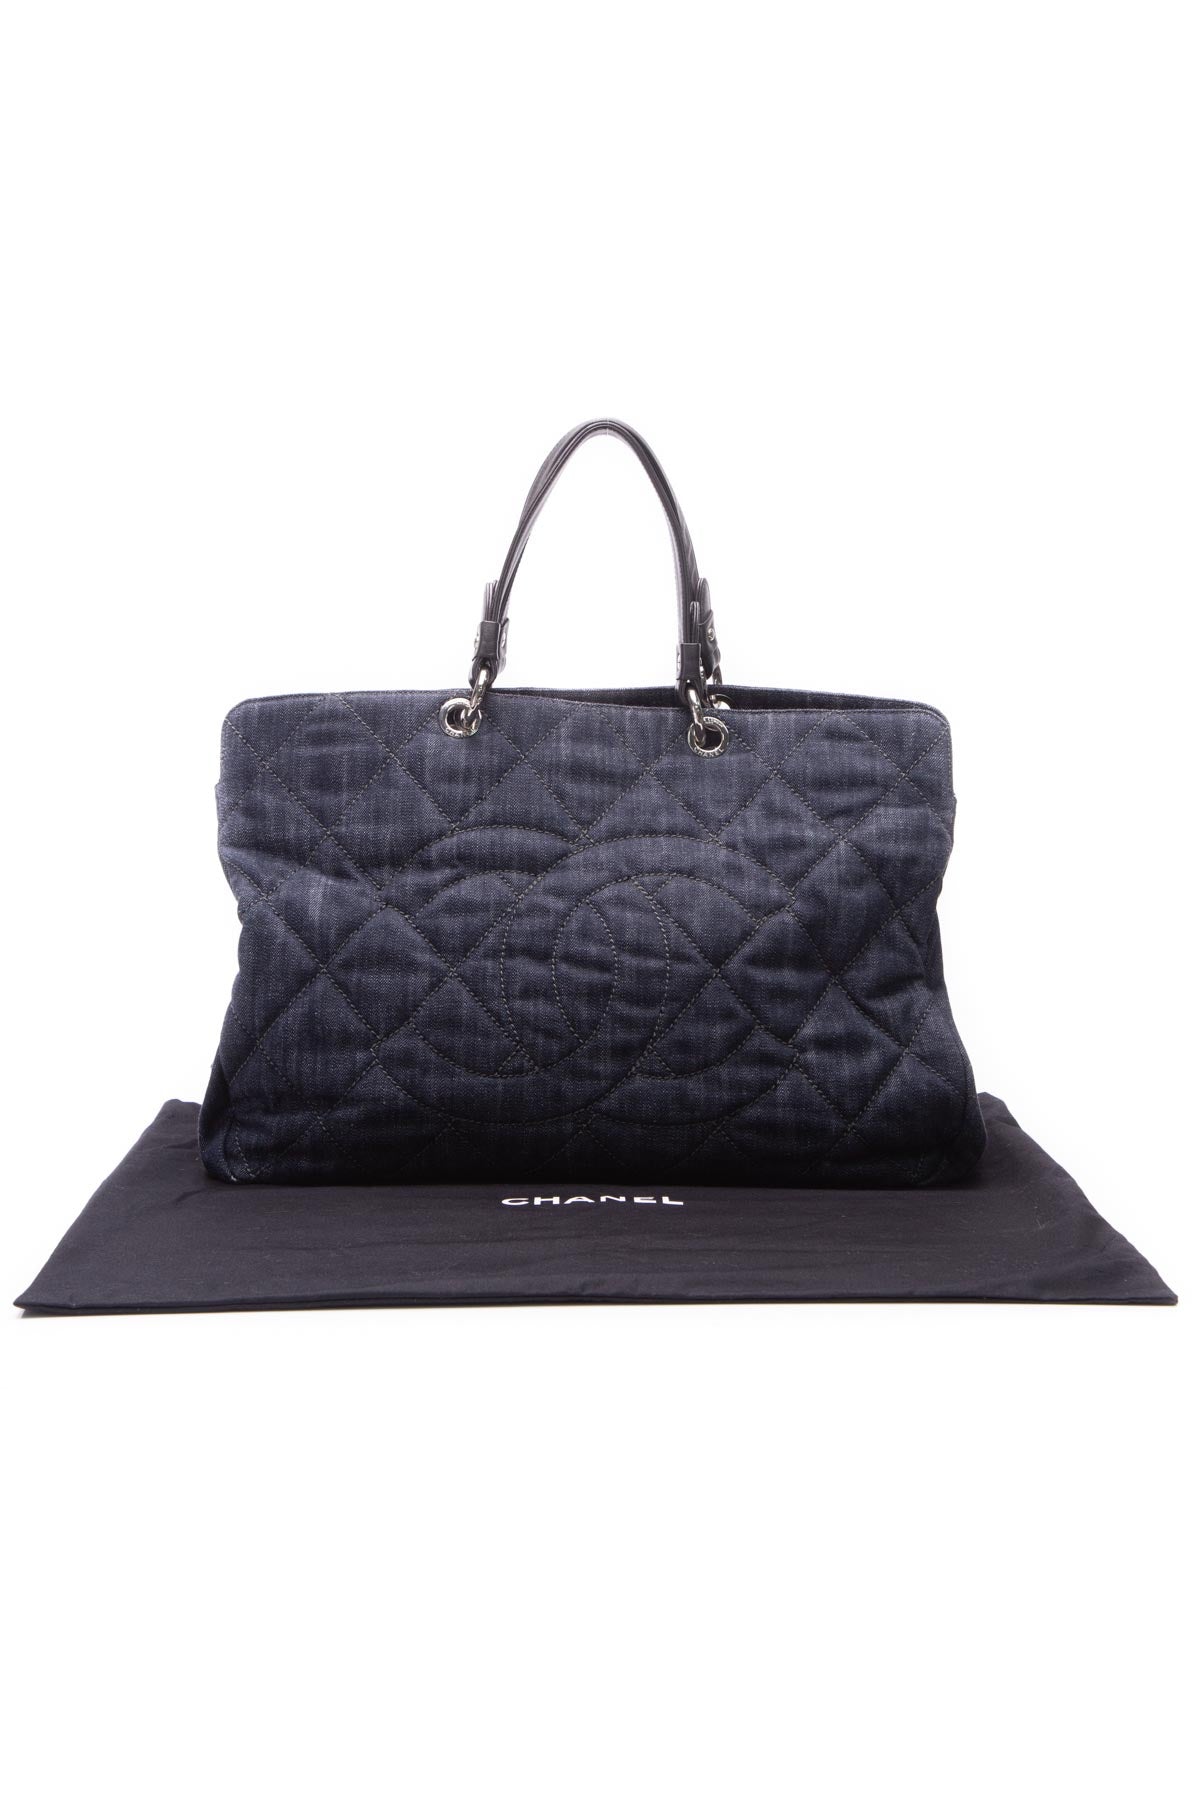 Chanel Quilted CC Denim Tote Bag